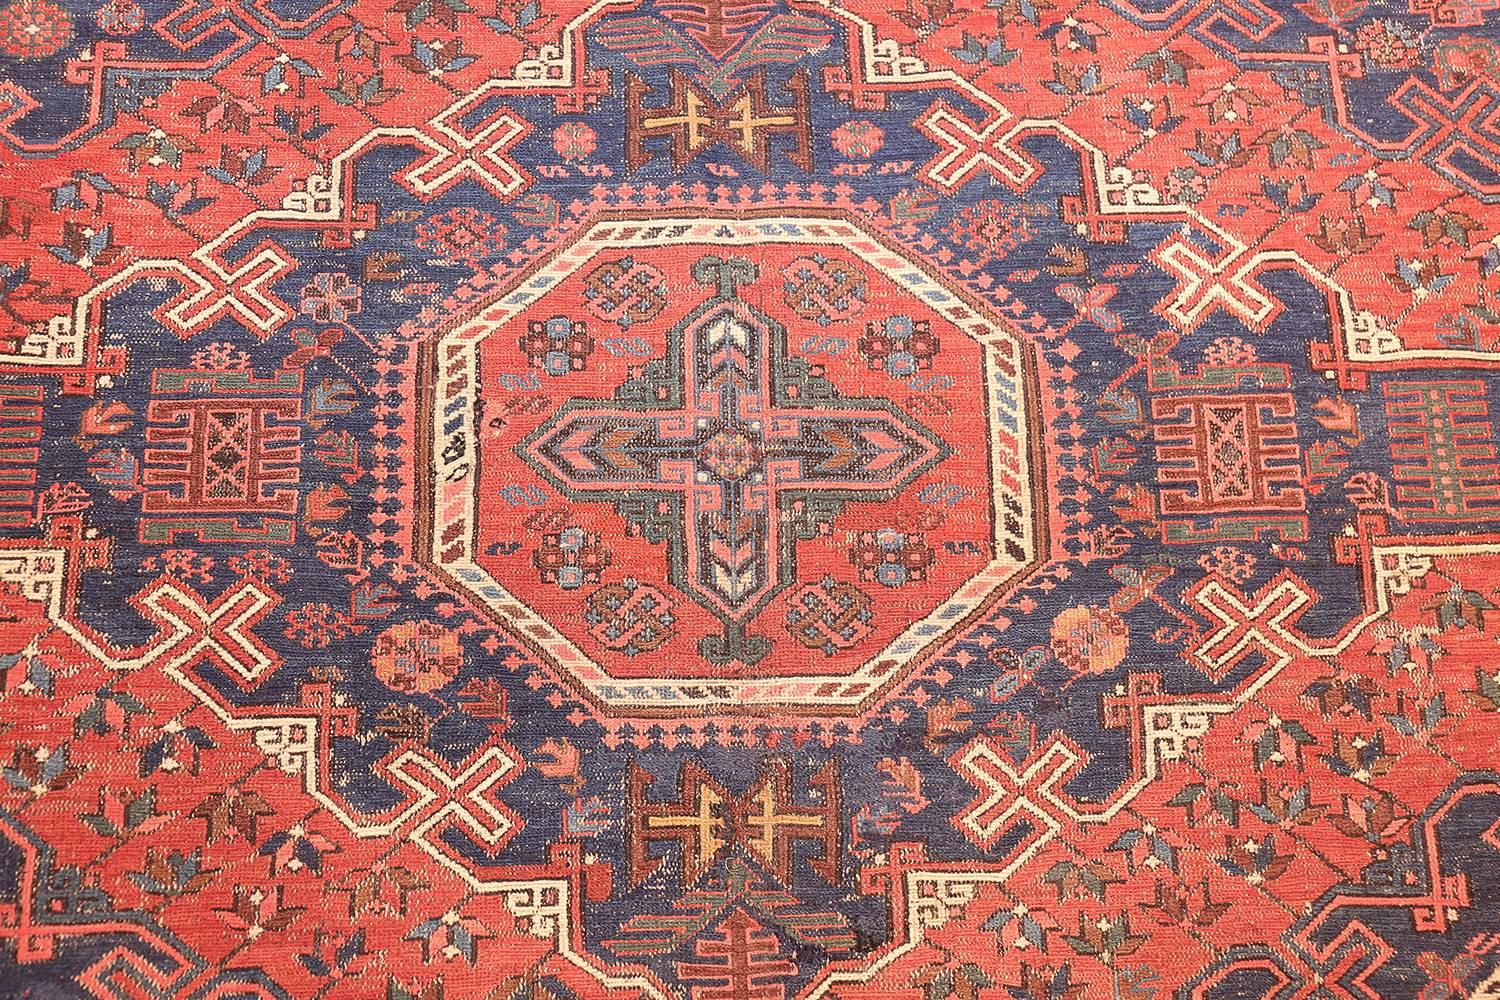 Beautiful Antique Caucasian Soumak Rug, Country of Origin: Caucasian, Circa Date: Early 20th Century – Size: 8 ft x 12 ft 6 in (2.44 m x 3.81 m)

With deep, rich colors and elegant yet tribal shapes, this Caucasian rug, an antique Soumak rug, is a